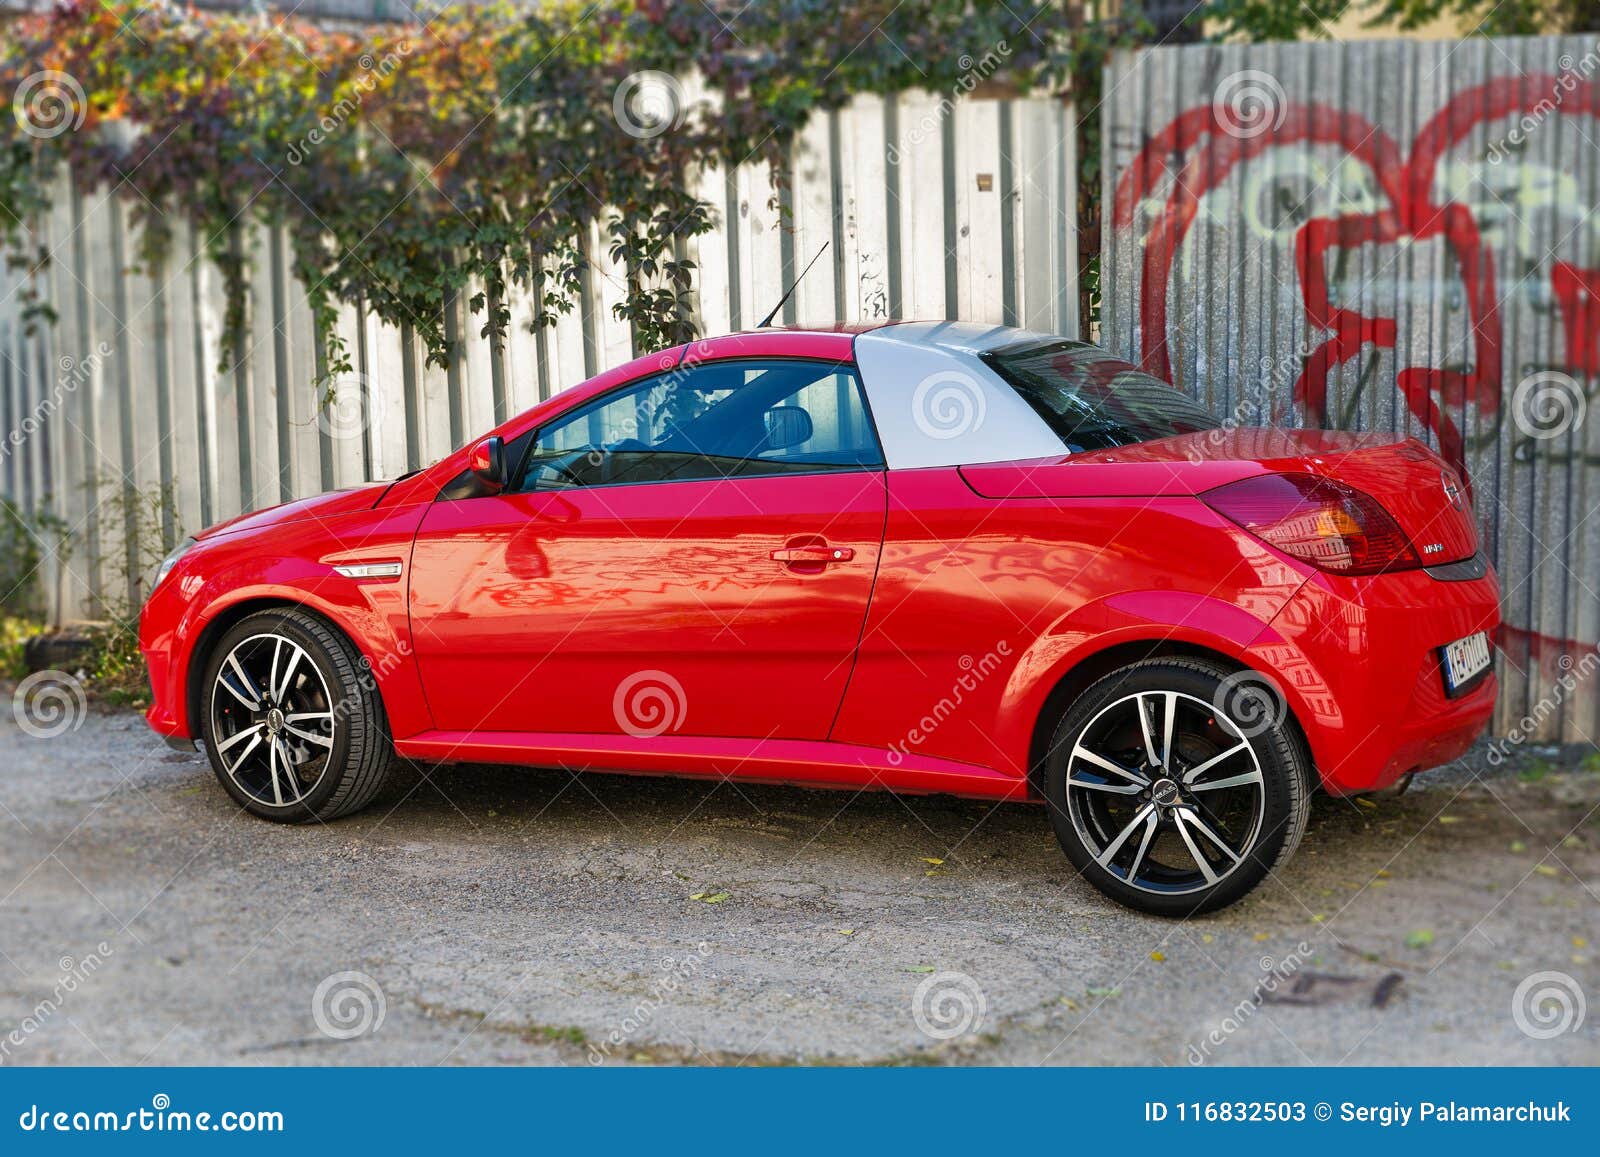 Red Opel Tigra Parked in Kosice, Slovakia. Editorial Stock Photo